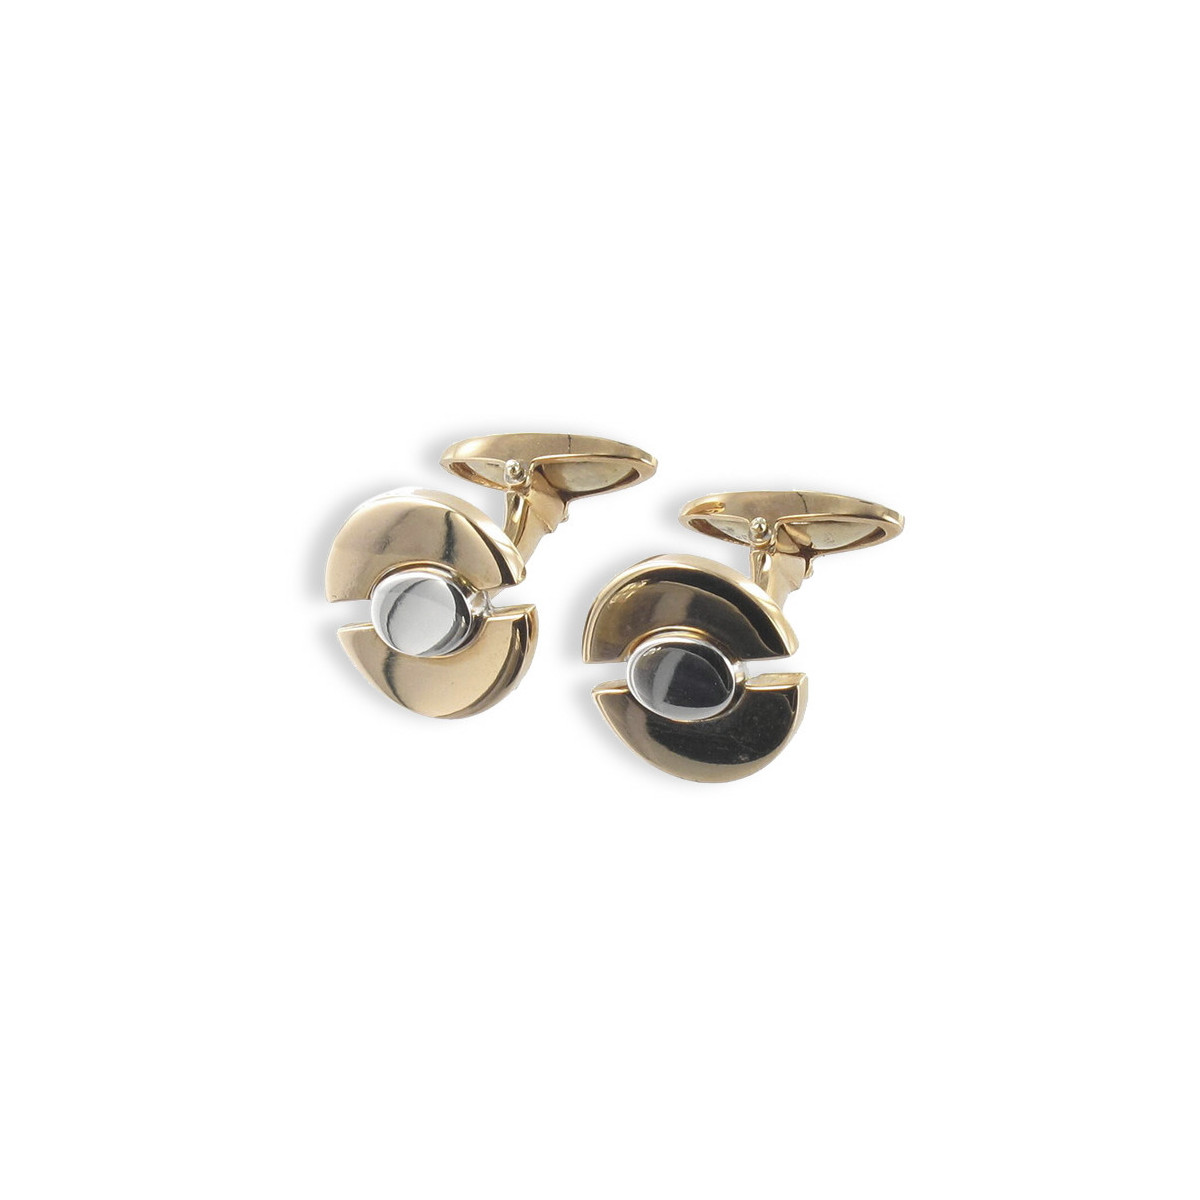 CUFFLINKS ROSE GOLD AND WHITE GOLD